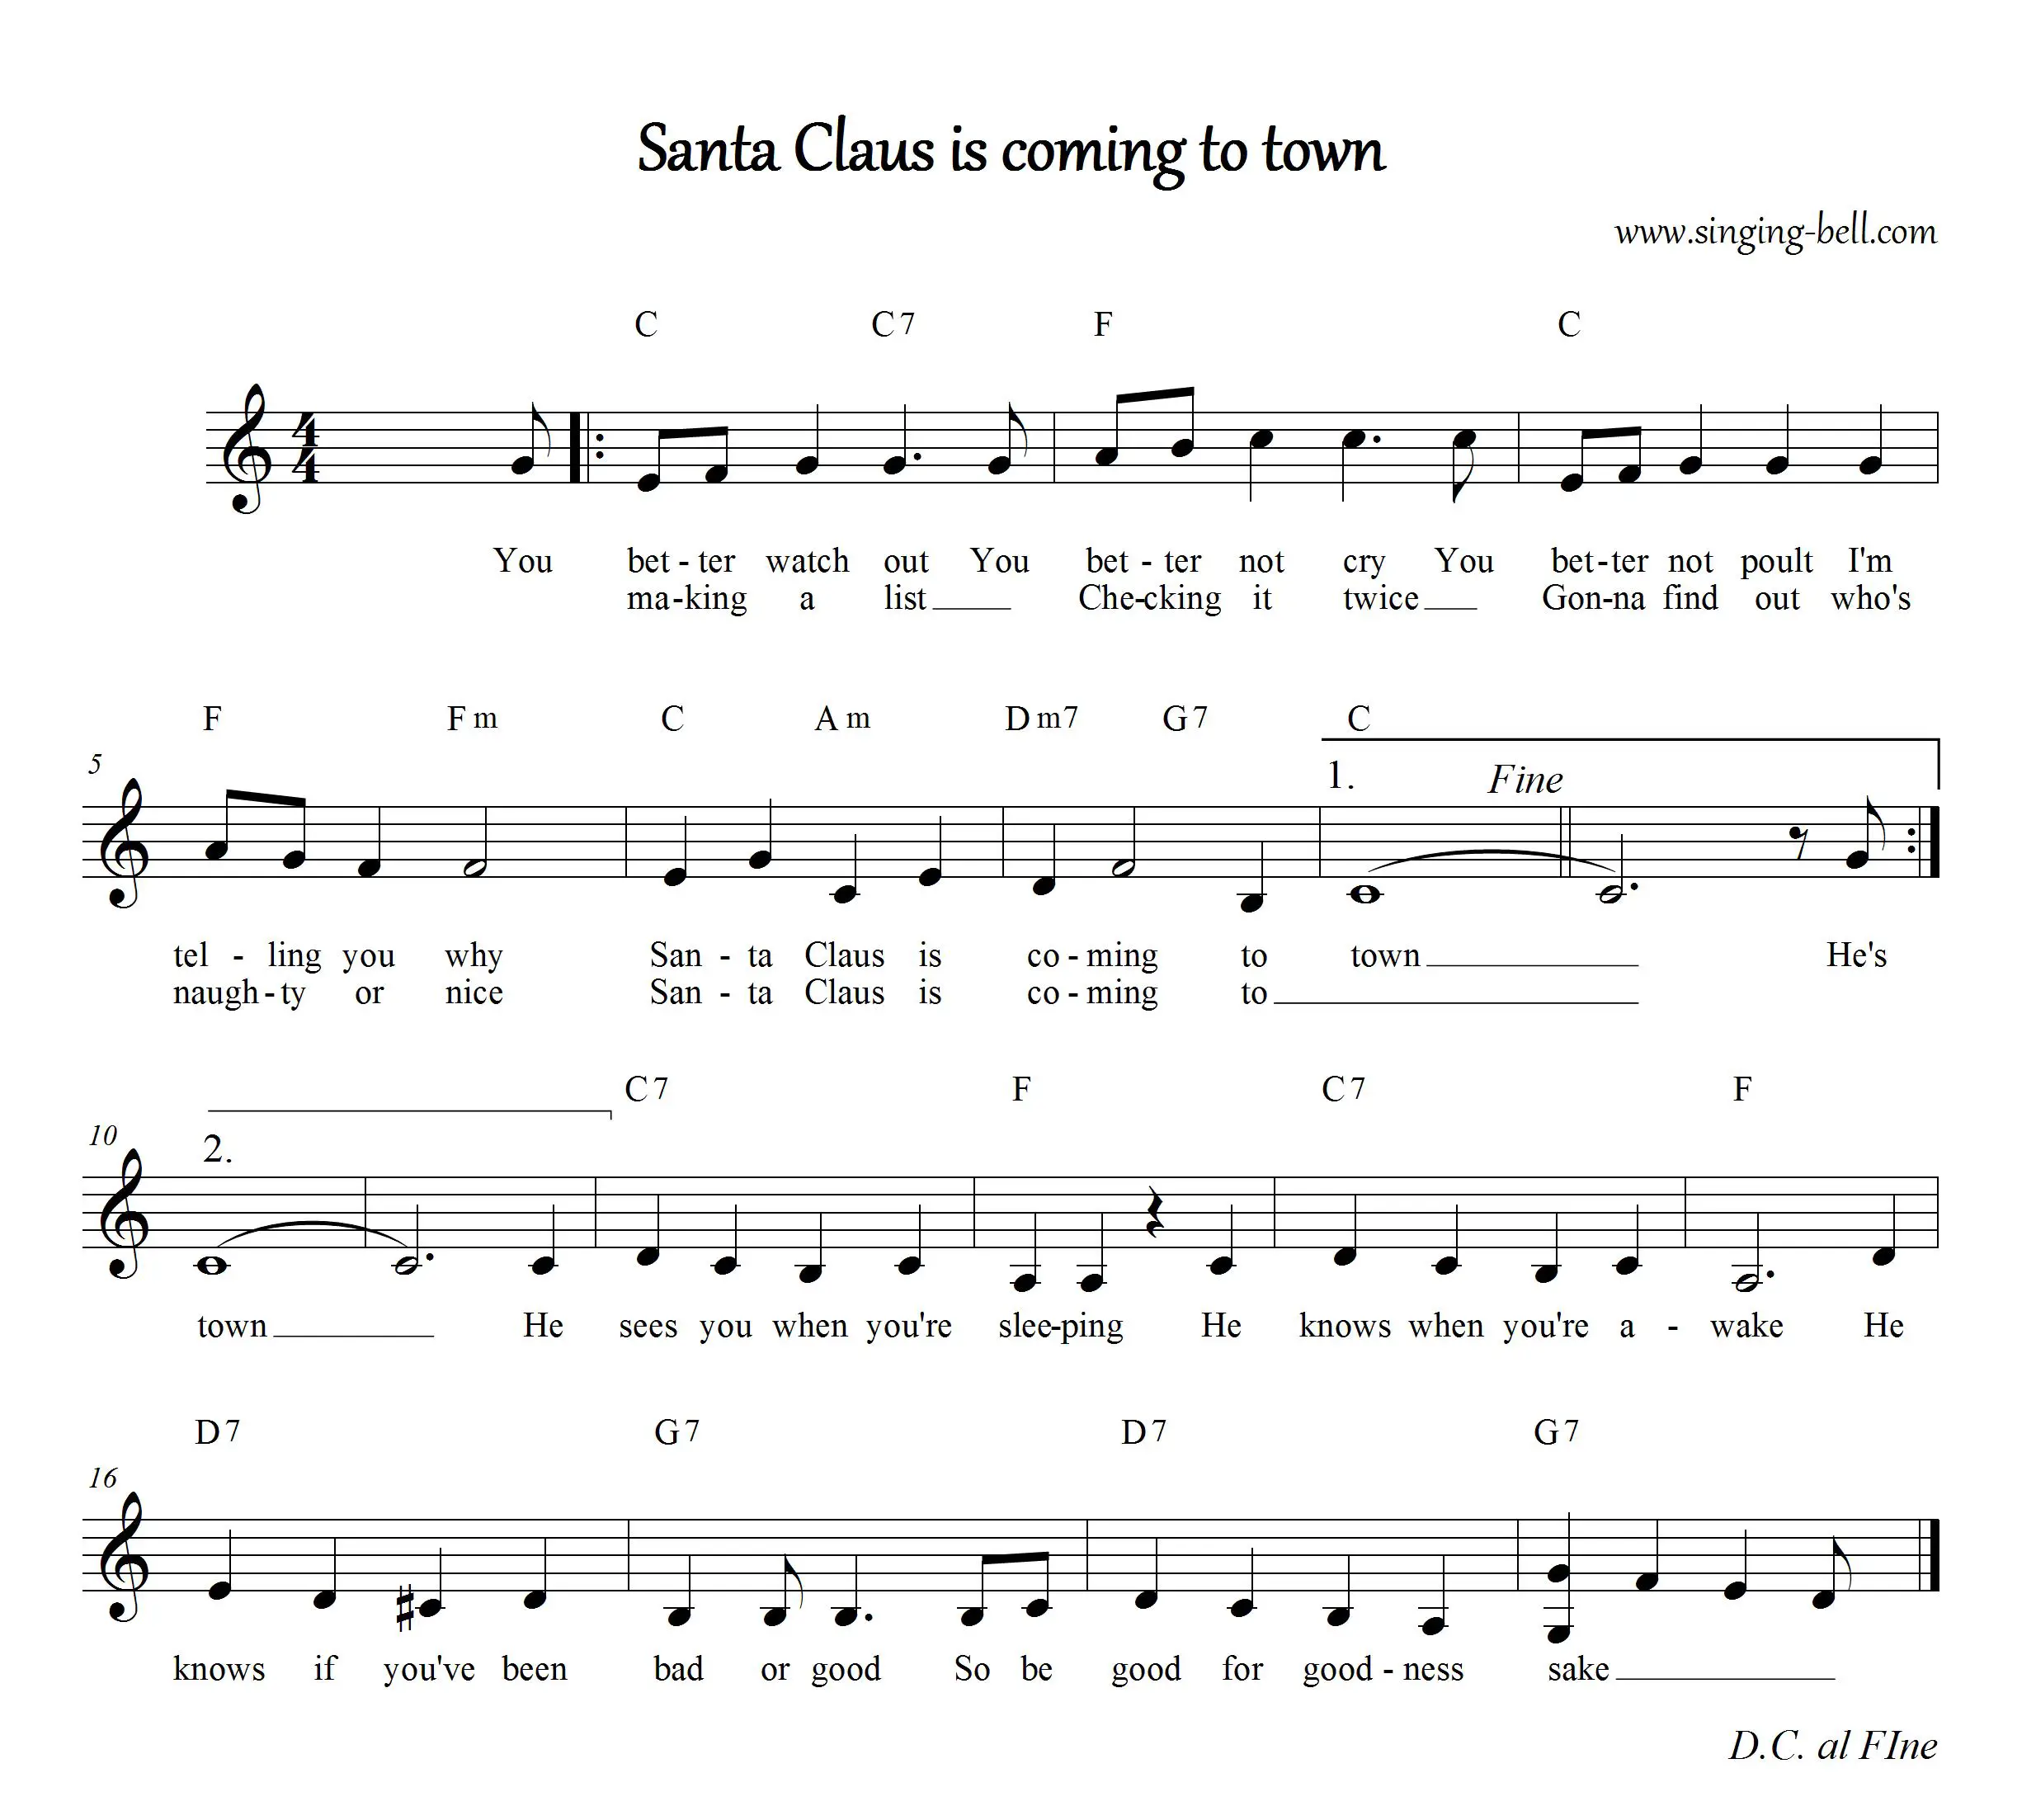 Santa Claus is Coming to Town - Christmas Music Score (in C)